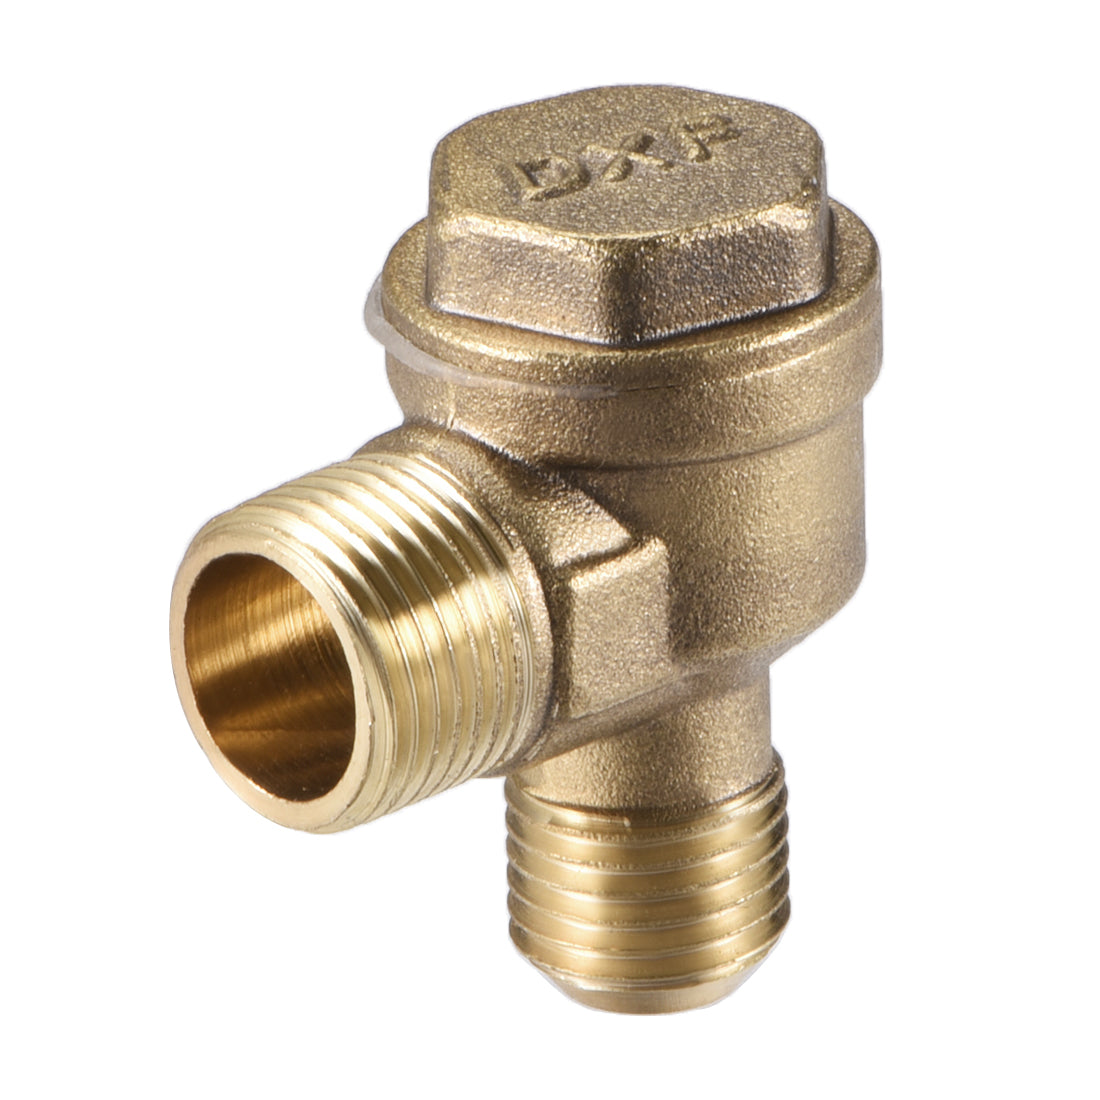 uxcell Uxcell Air Compressor Check Valve 90 Degree Male Threaded Brass Connector PT3/8" x M14